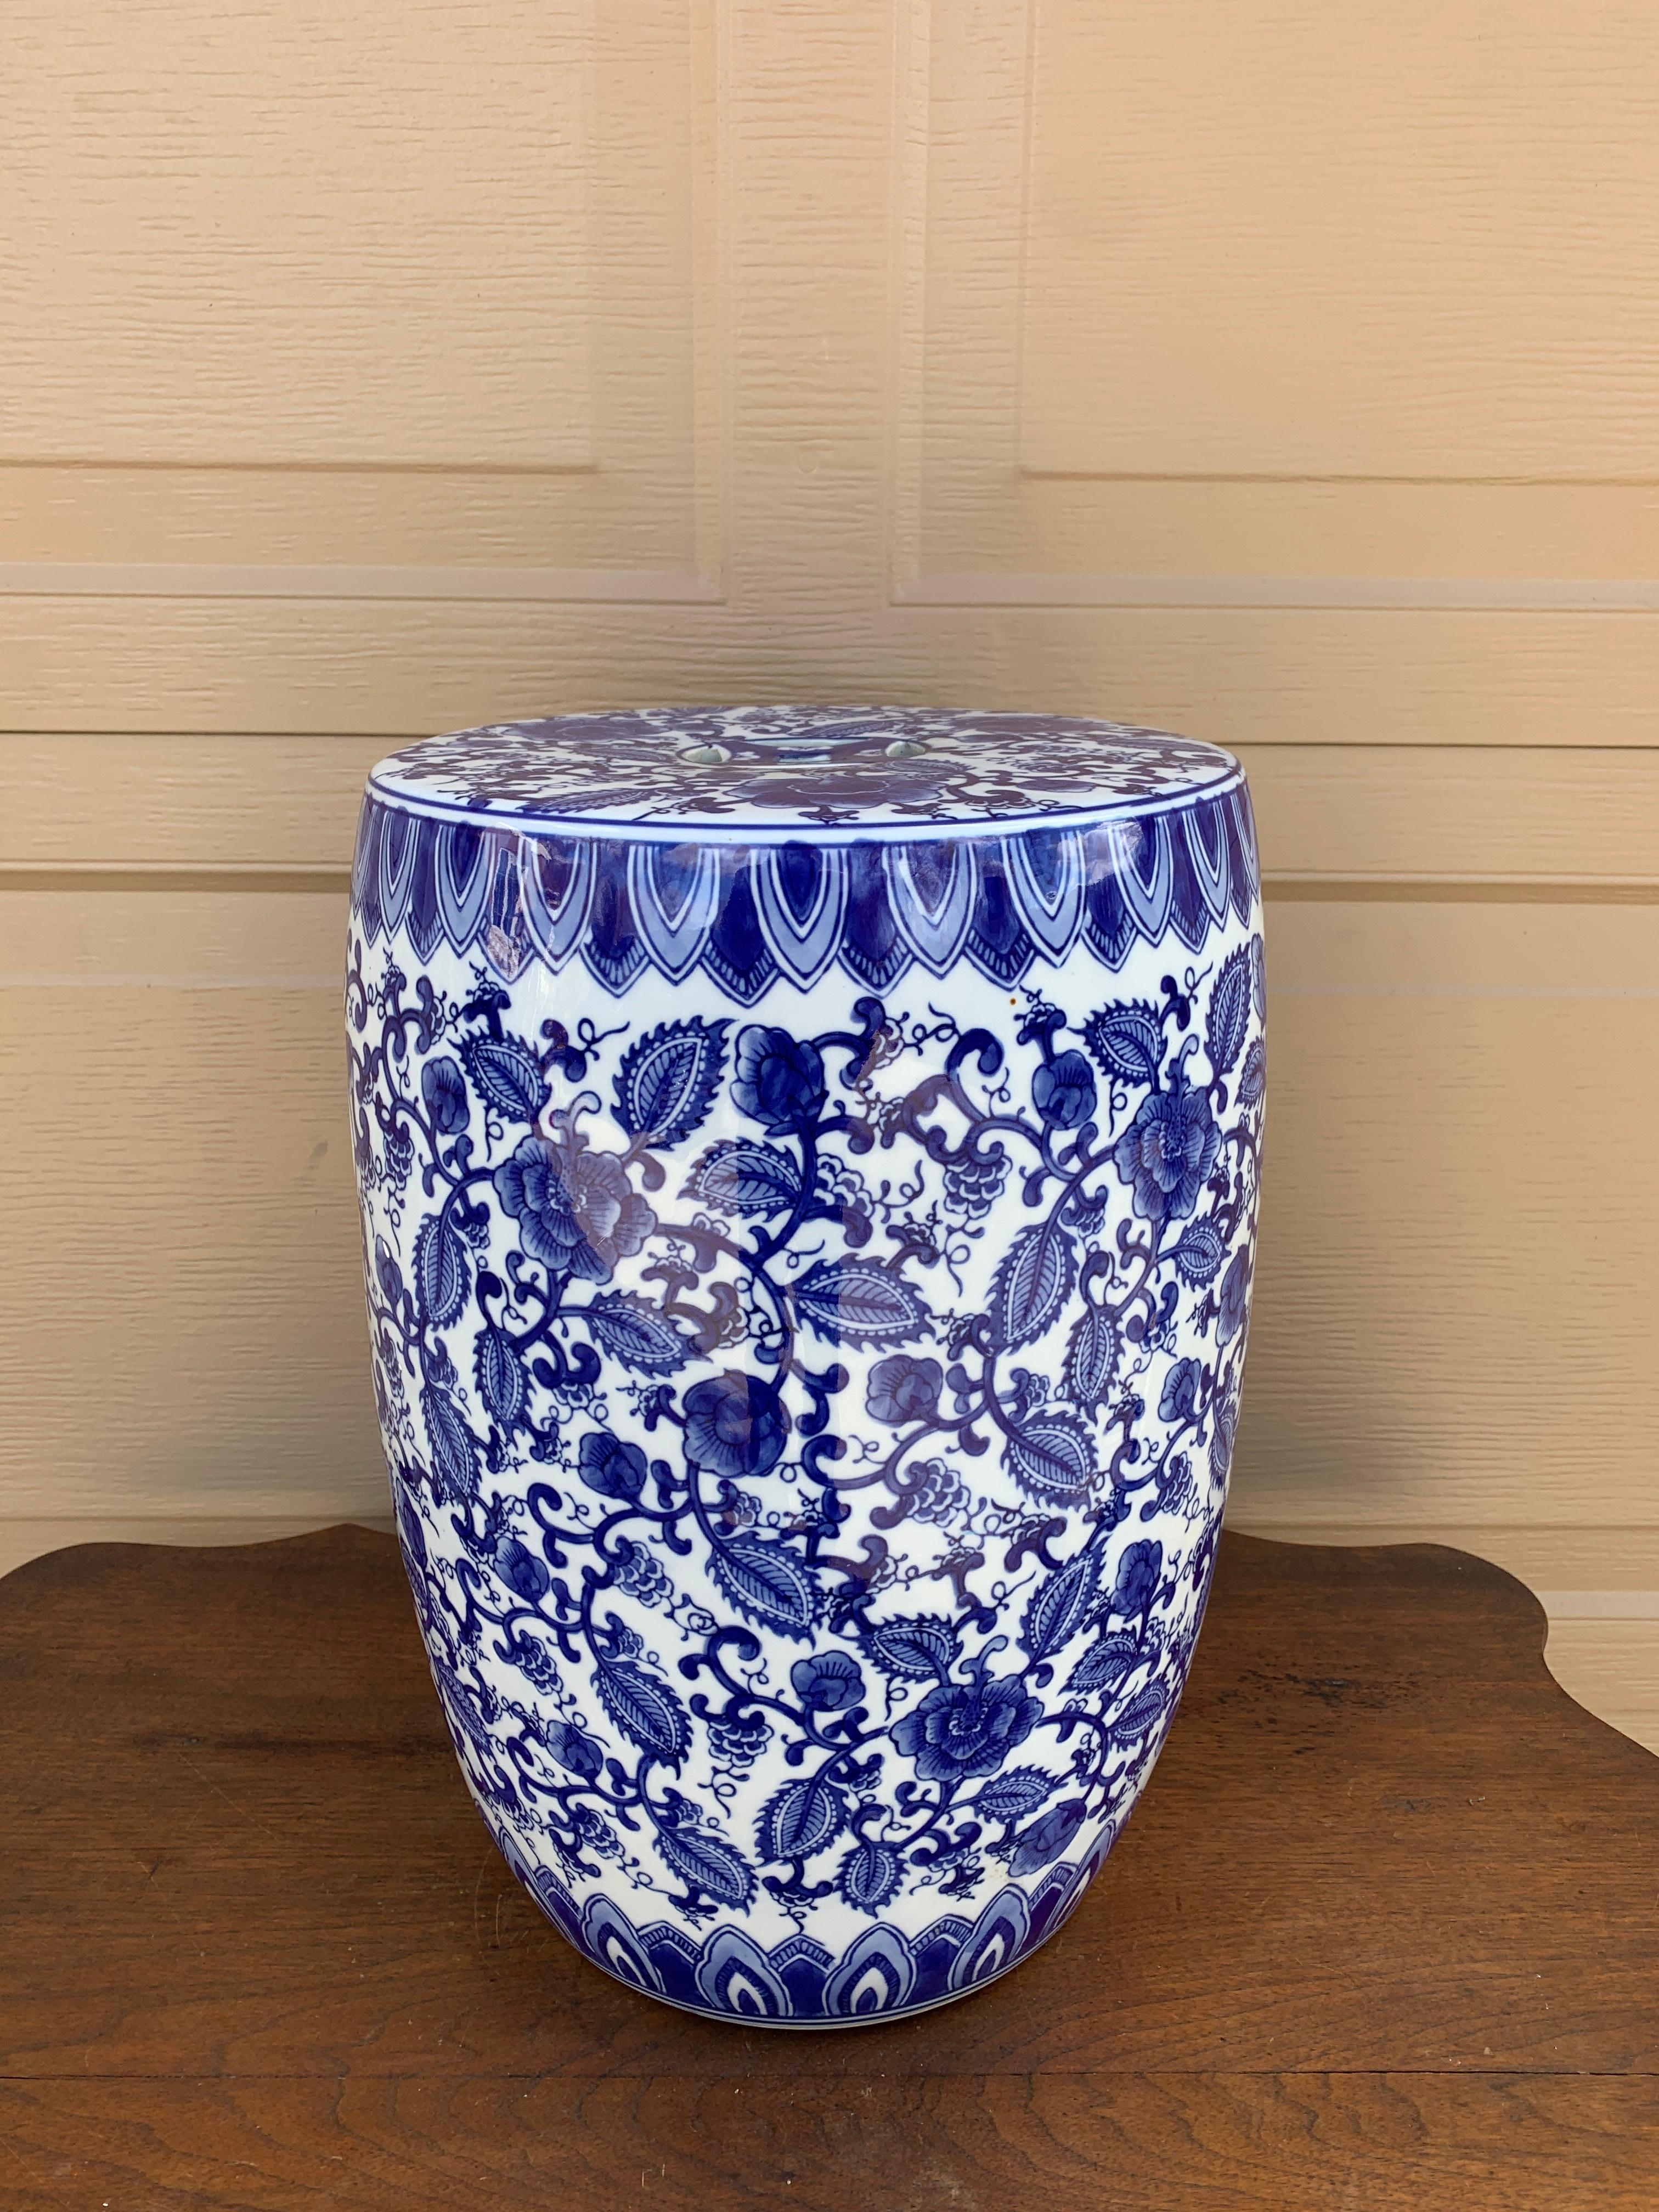 A gorgeous Chinoiserie blue and white porcelain garden stool, plant stand, or small side table featuring a floral pattern.

USA, Late 20th Century

Measures: 11